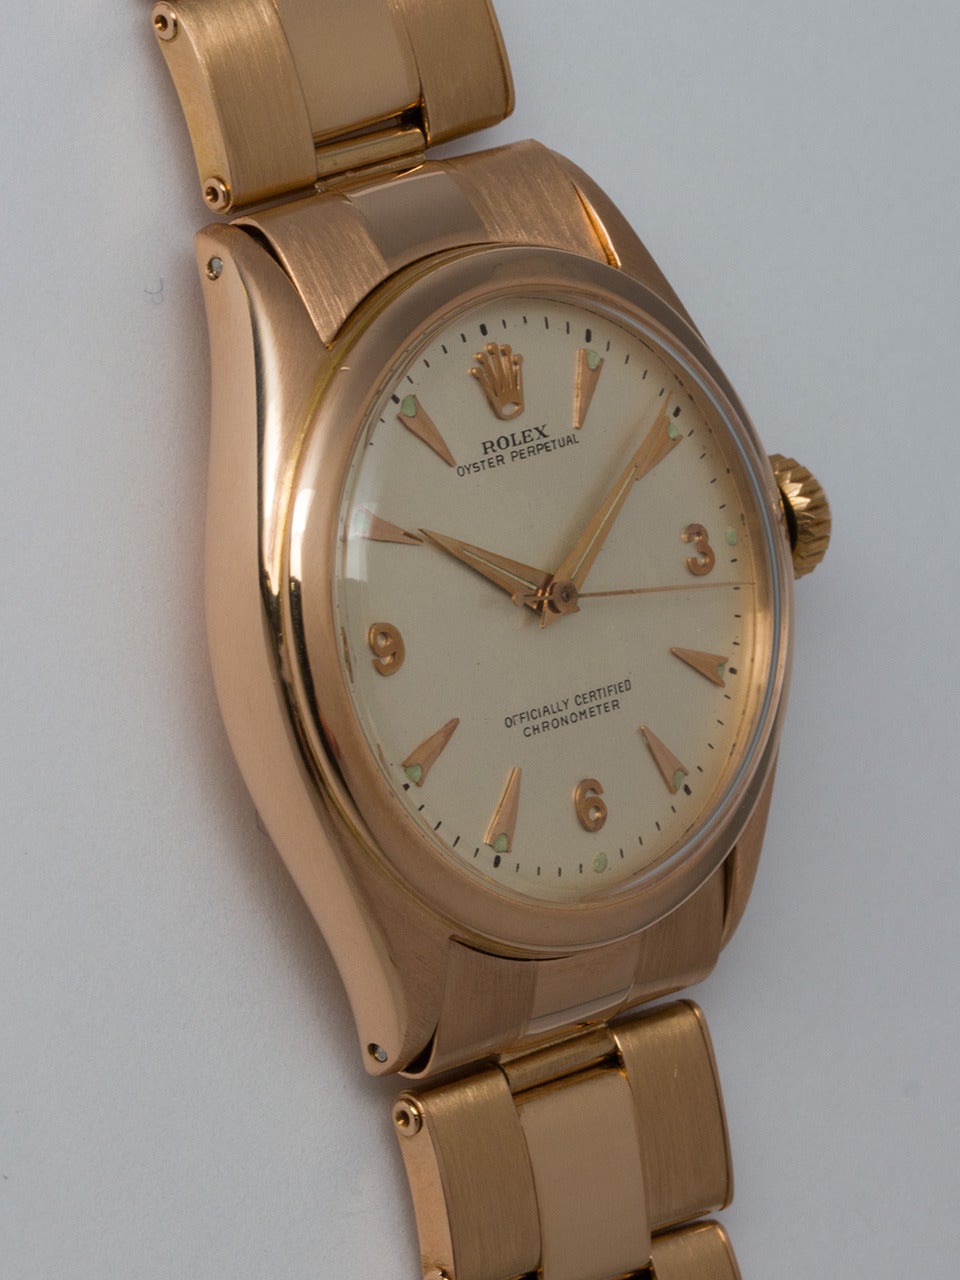 Rolex 18K Rose Gold Oyster Perpetual Wristwatch ref 6084 serial # 794,xxx circa 1952. 34mm diameter case with smooth bezel, acrylic crystal and large Super Oyster crown. Very pleasing restored matte silvered dial with rose gold indexes,  and rose